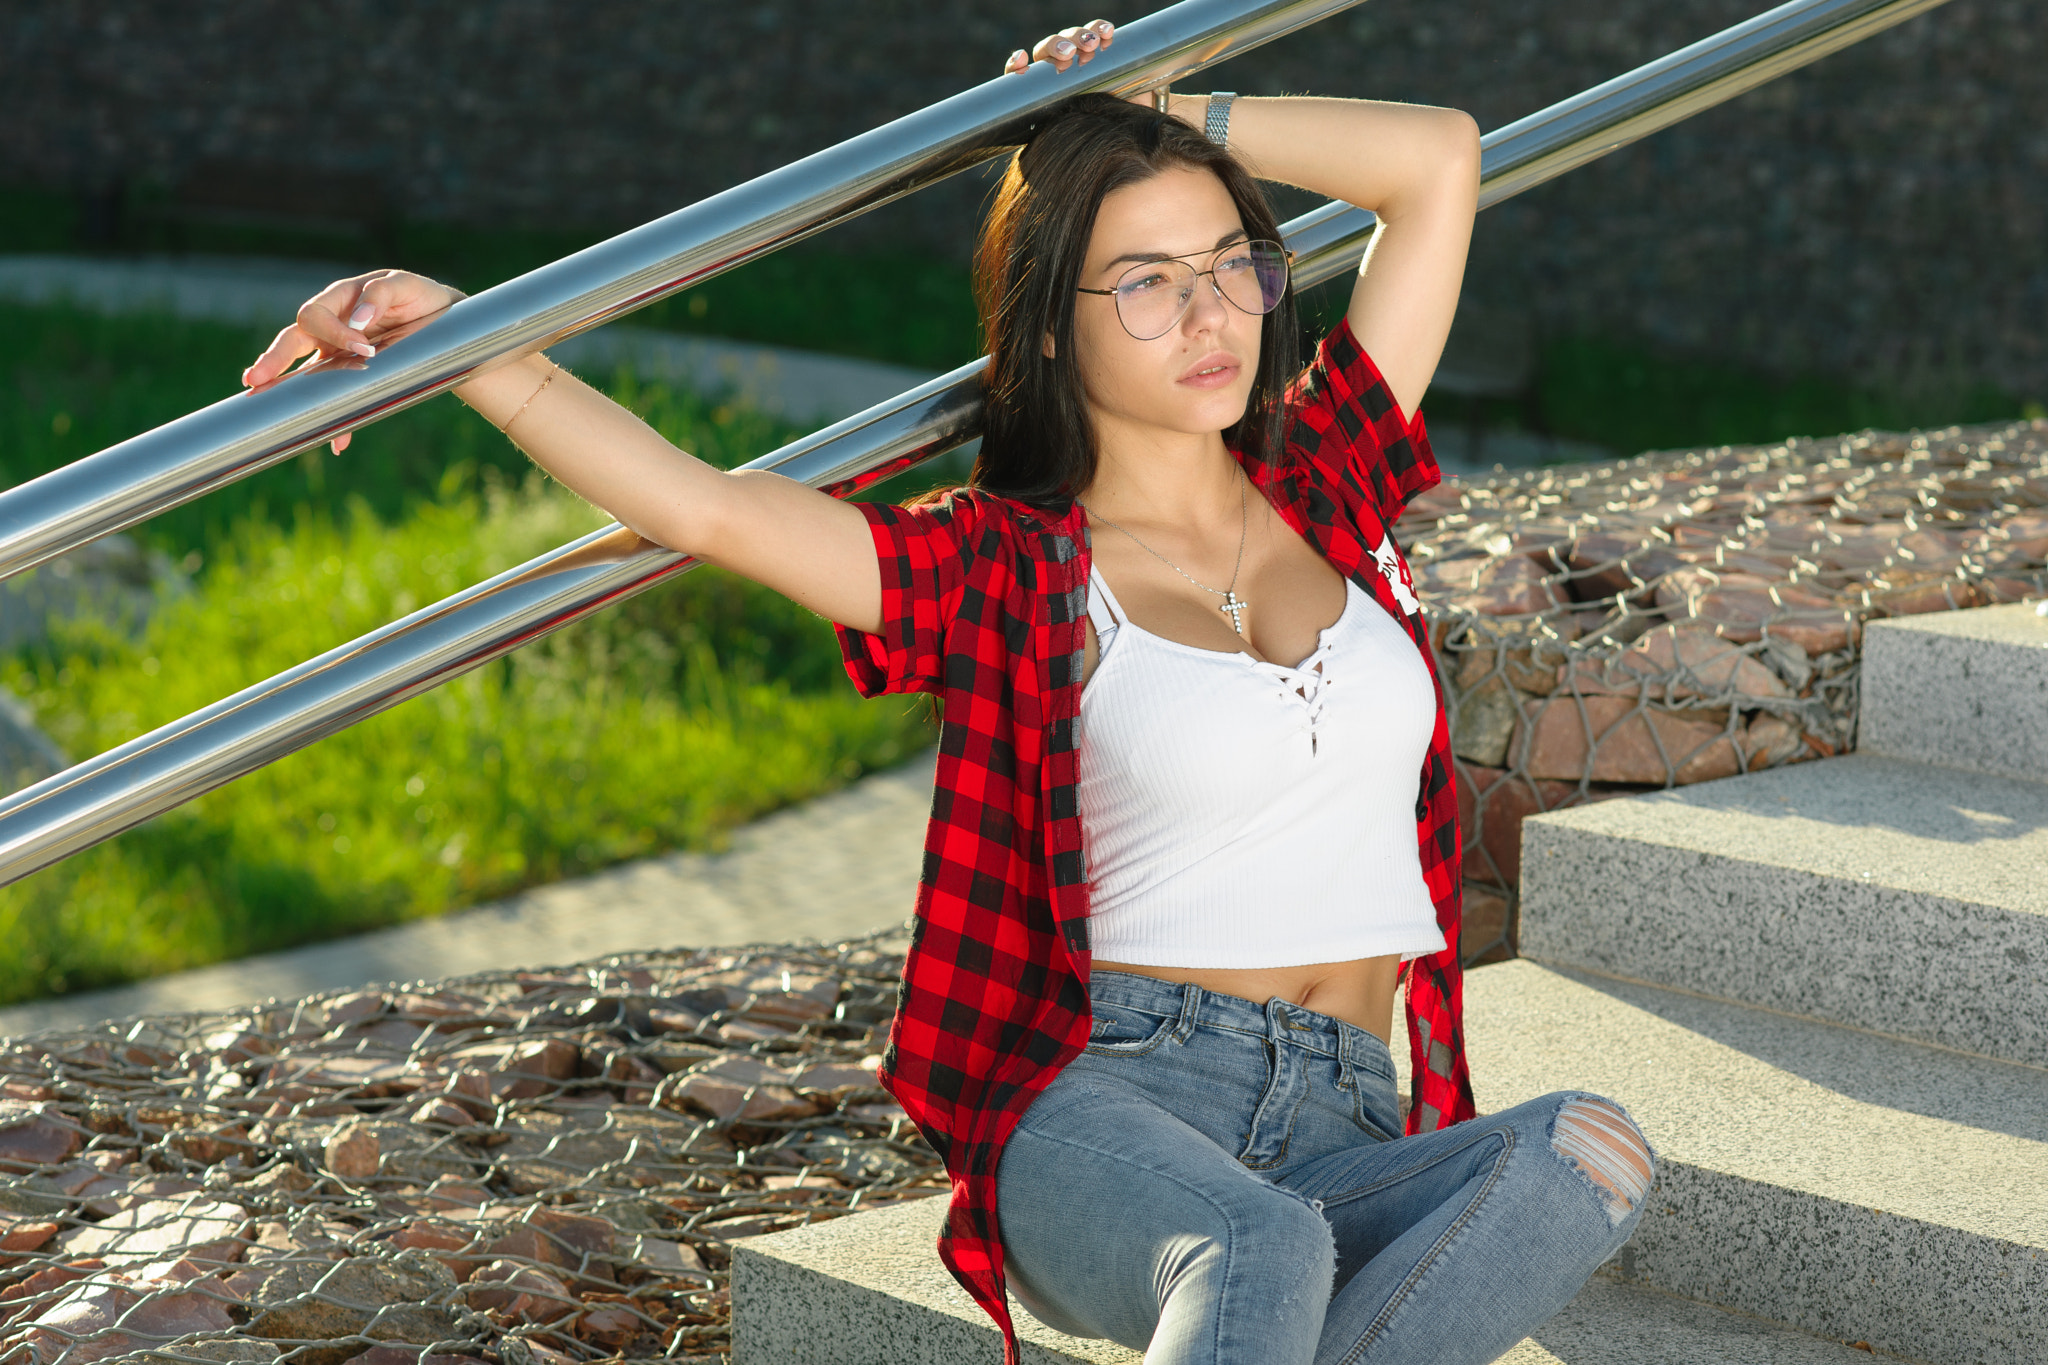 People 2048x1365 women portrait plaid shirt torn jeans stairs sitting women with glasses Marina Shimkovich lace up top